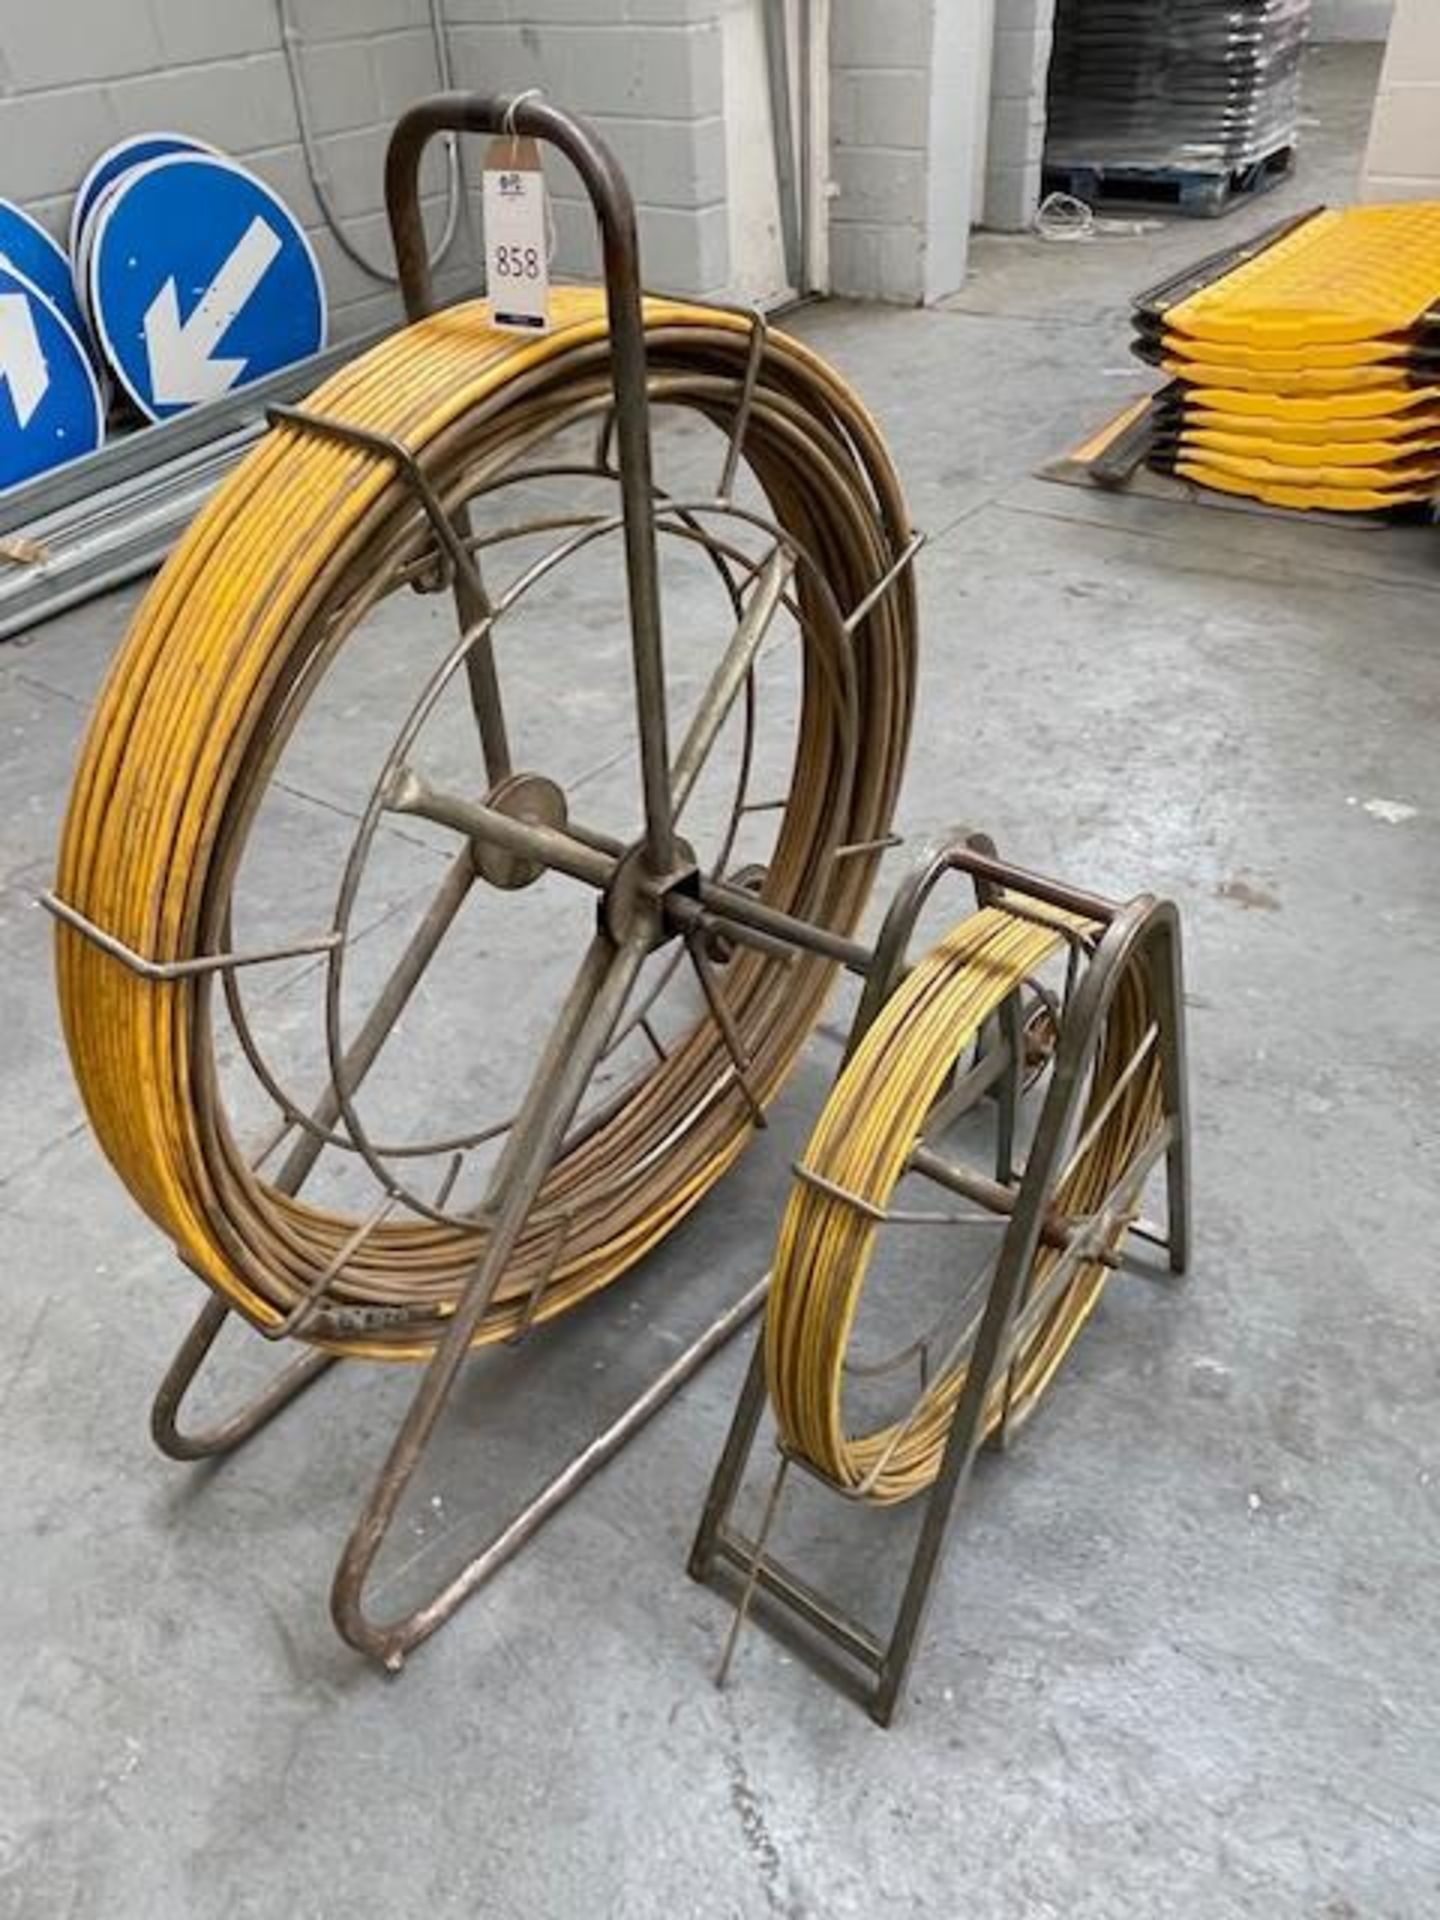 2 Cable Reels (Location: Harlow. Please Refer to General Notes)